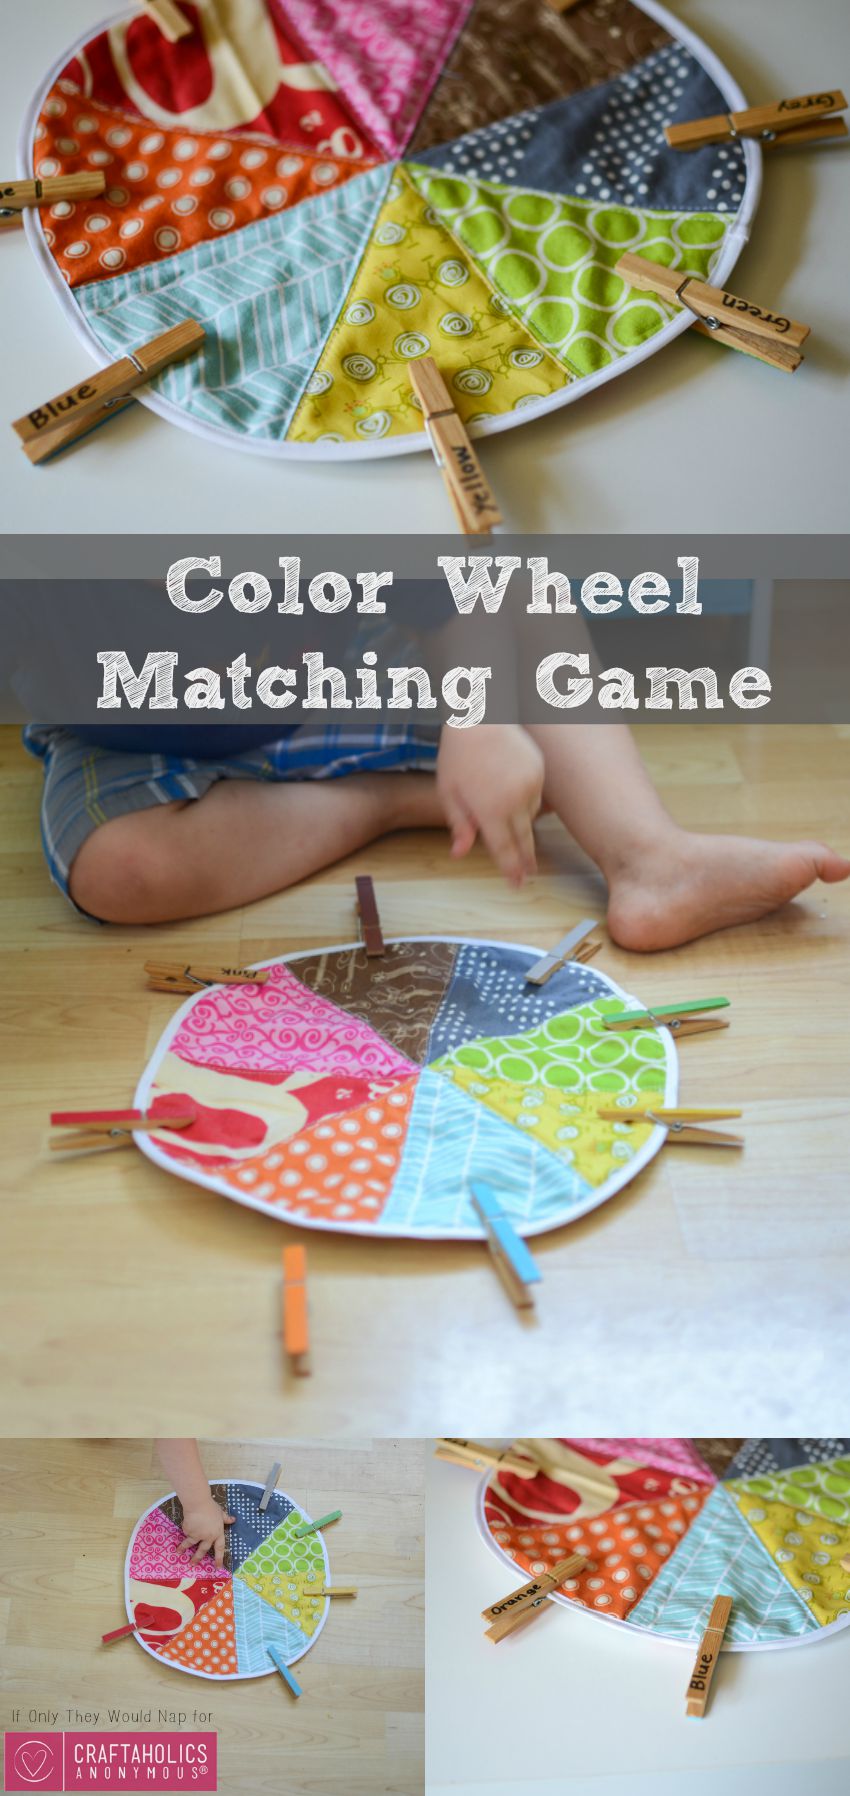 DIY Tutorial for Cute Color matching Game for Preschoolers and Toddlers on www.craftaholicsanonymous.net